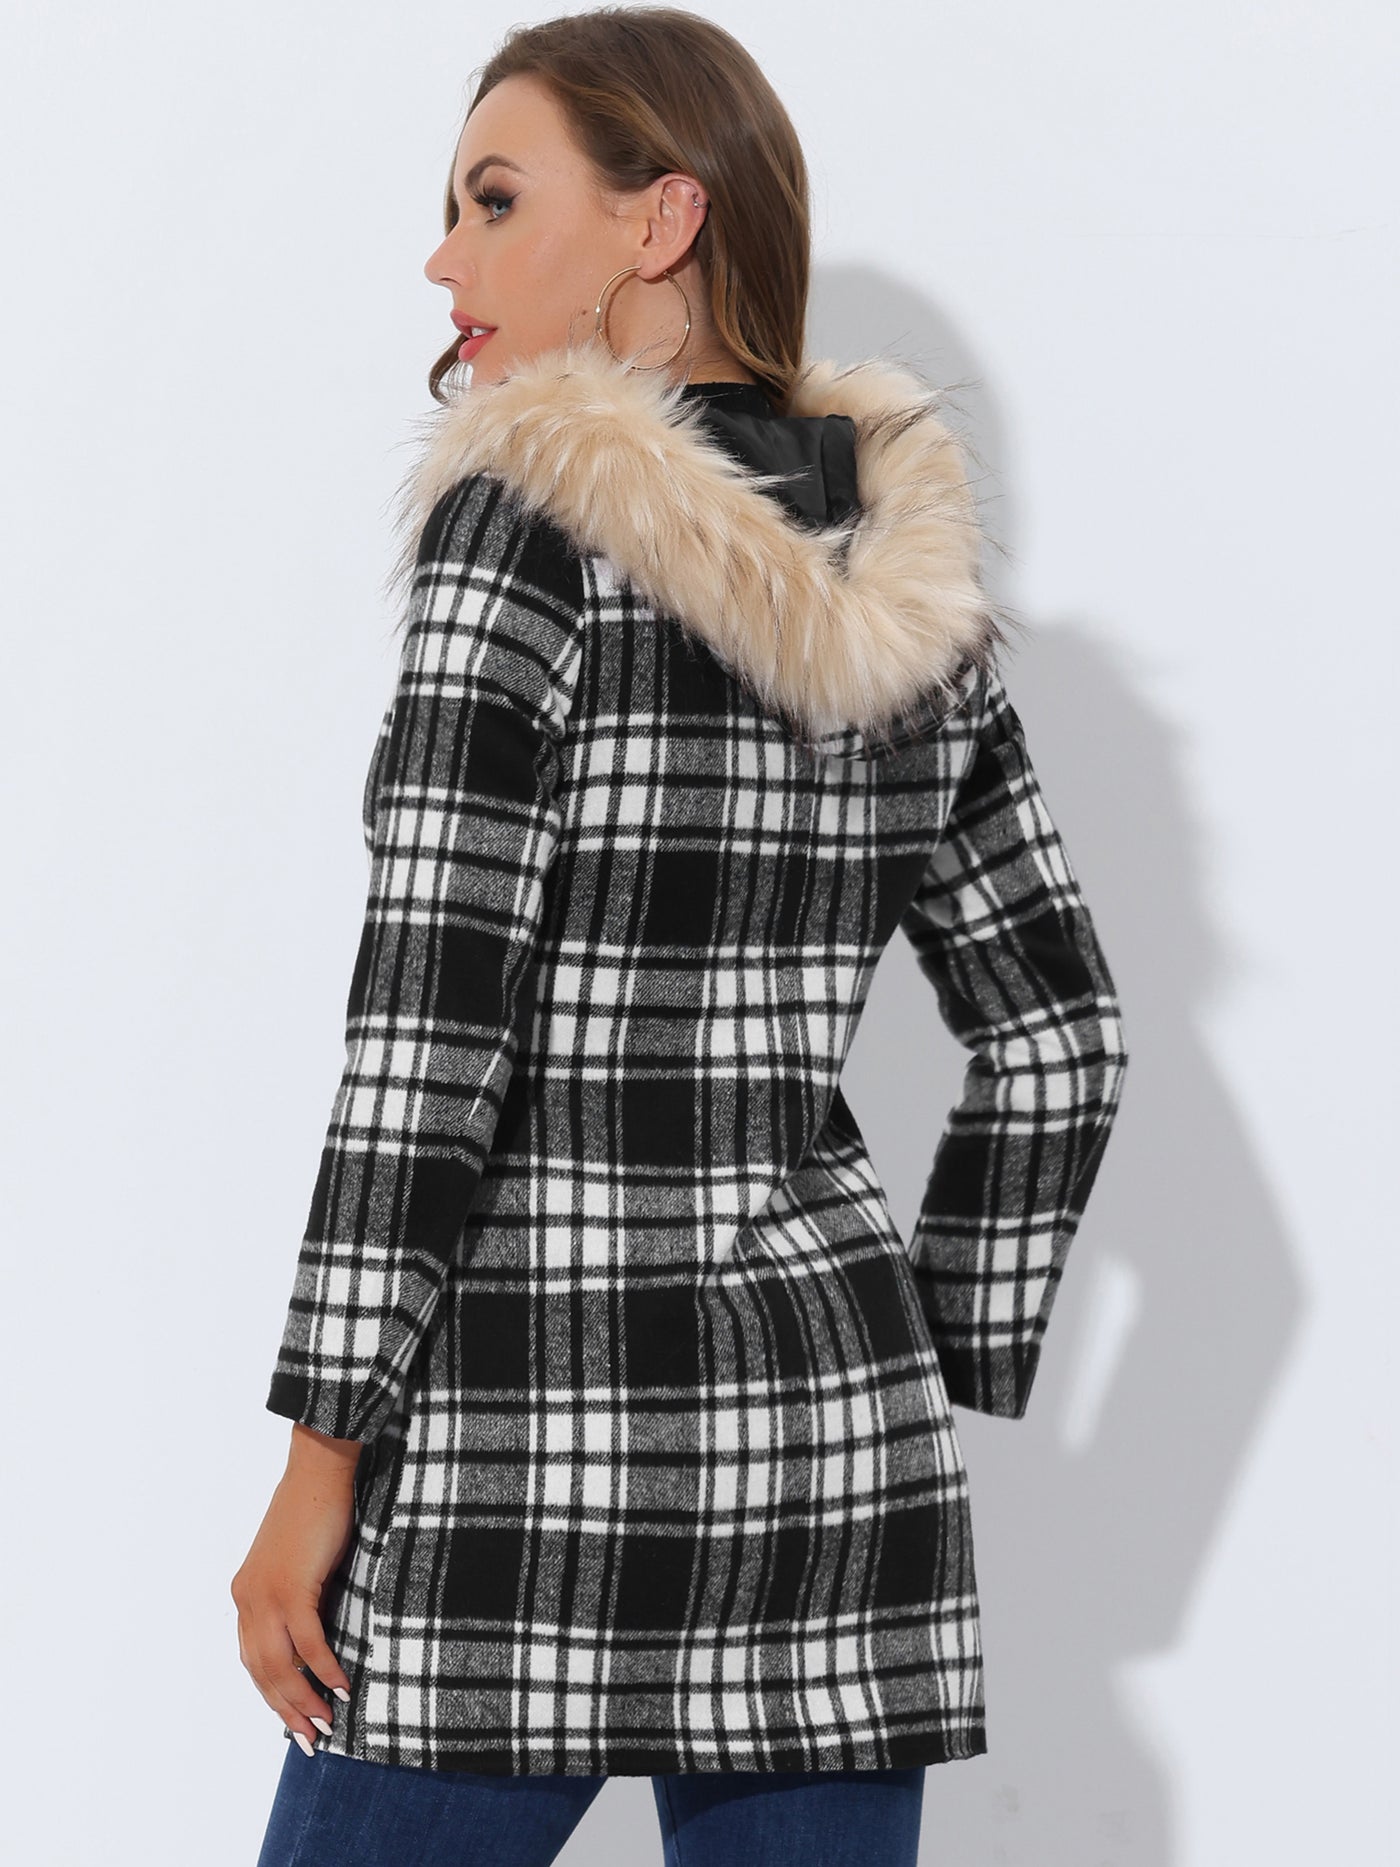 Allegra K Winter Thick Button Front Pockets Check Plaid Coat with Fluffy Hood